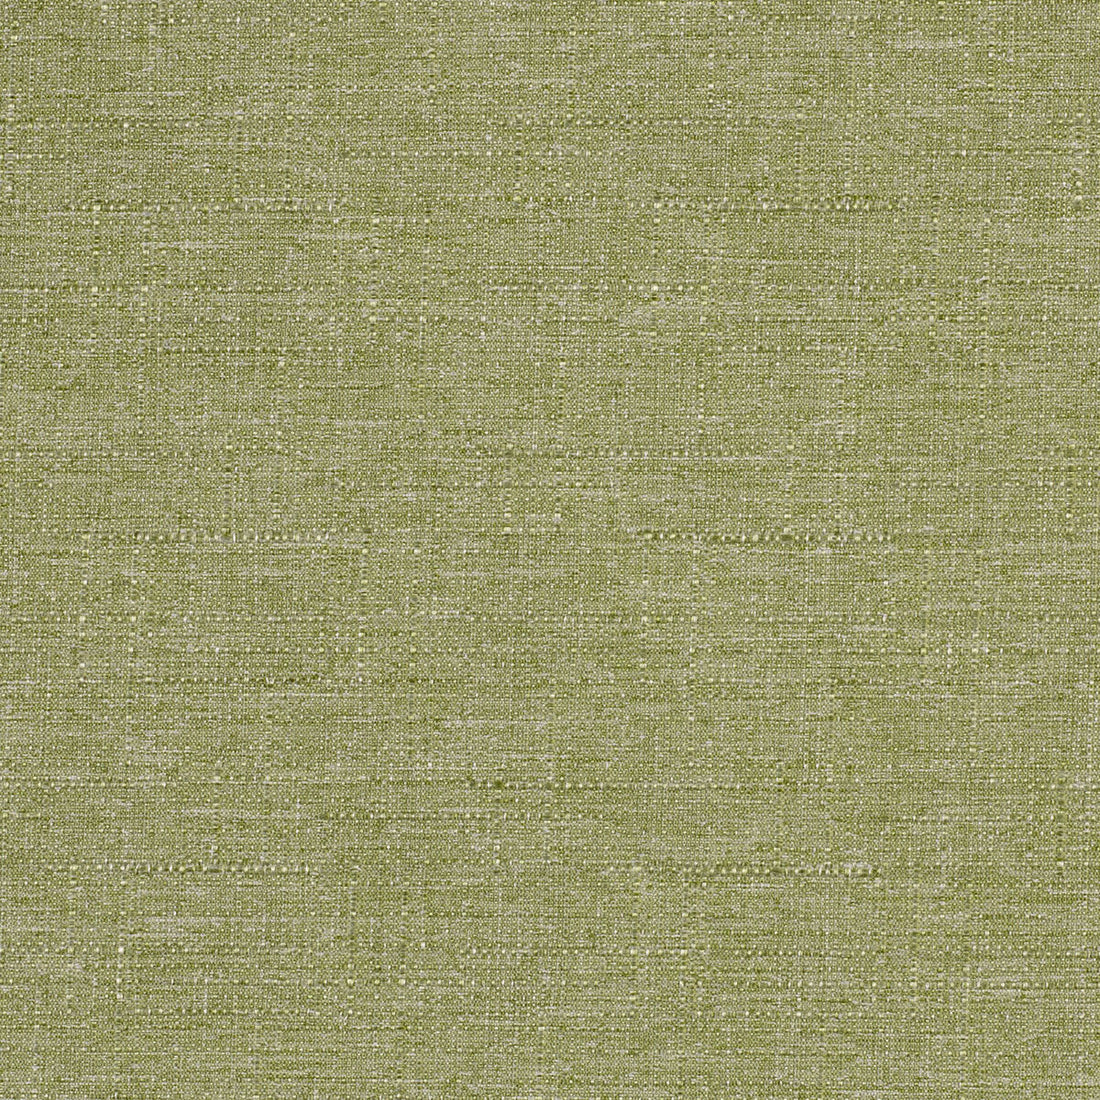 Kravet Contract fabric in 4321-30 color - pattern 4321.30.0 - by Kravet Contract